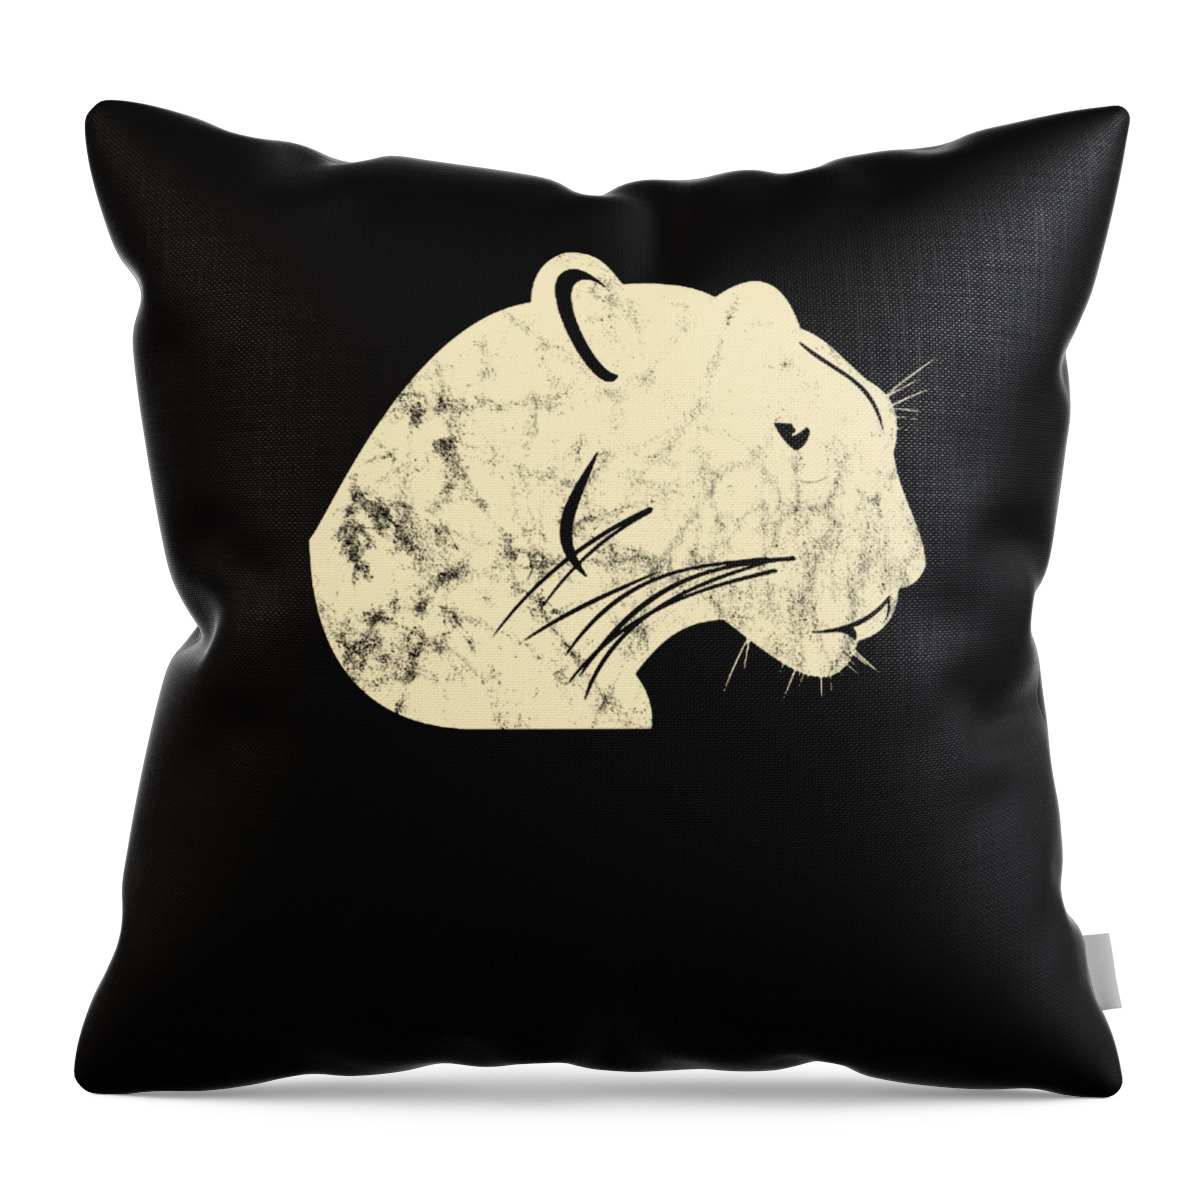 Wilderness Throw Pillow featuring the digital art Panther Head Vintage Panthers Jaguar Leopard Wildlife Forest Feline Cougar Gift by Thomas Larch